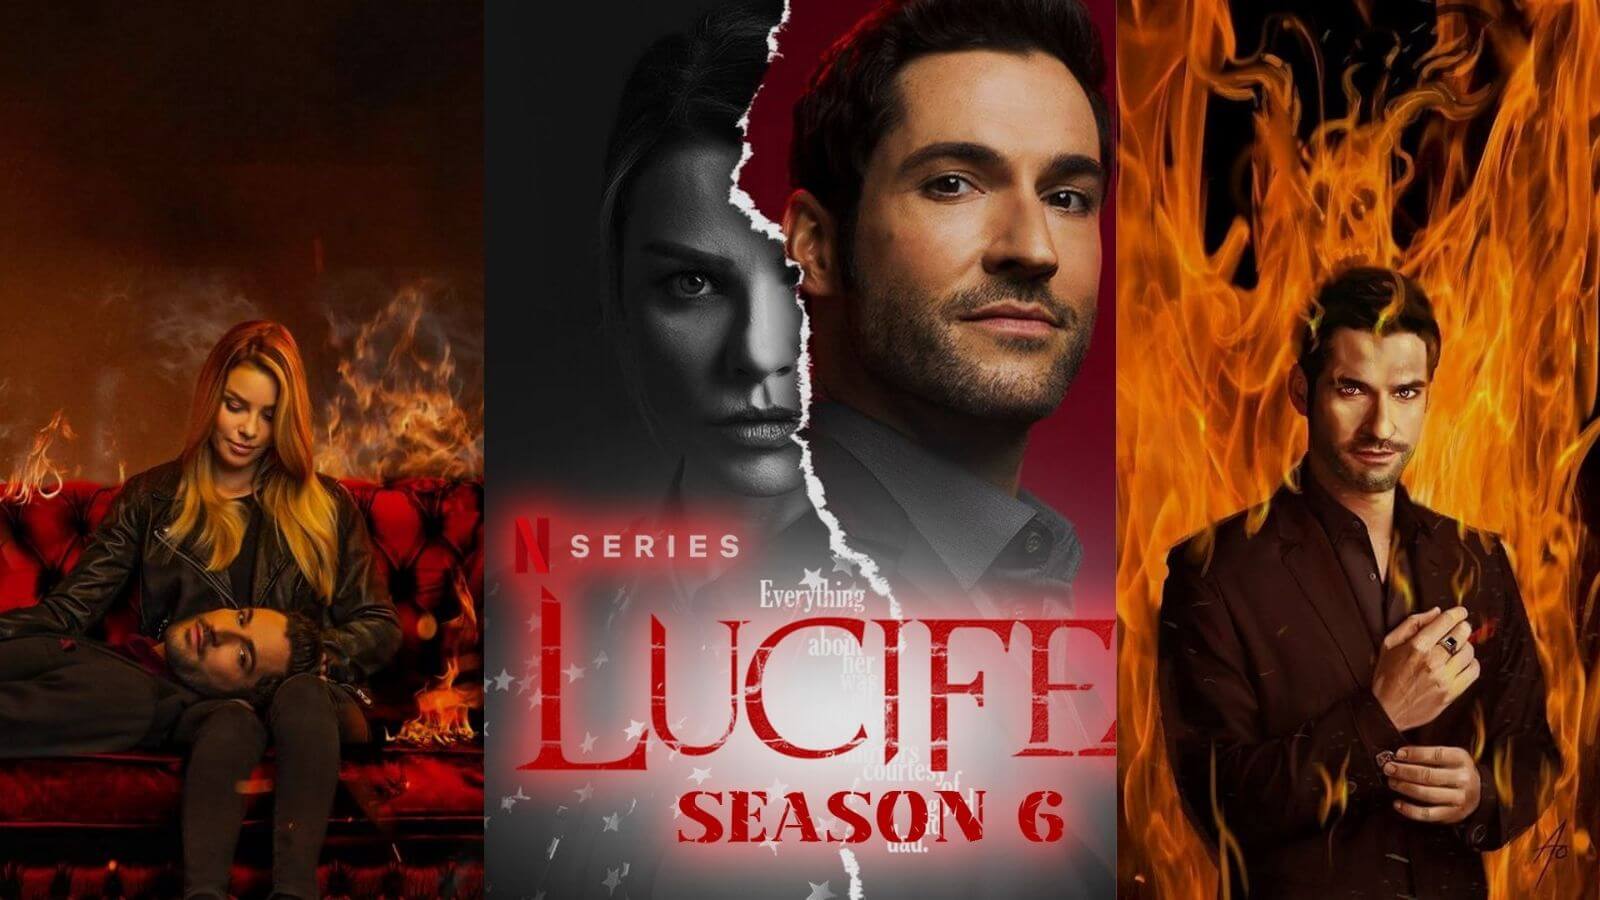 Lucifer Season 6 to premiere soon? Is this the final season? Here's the release date!